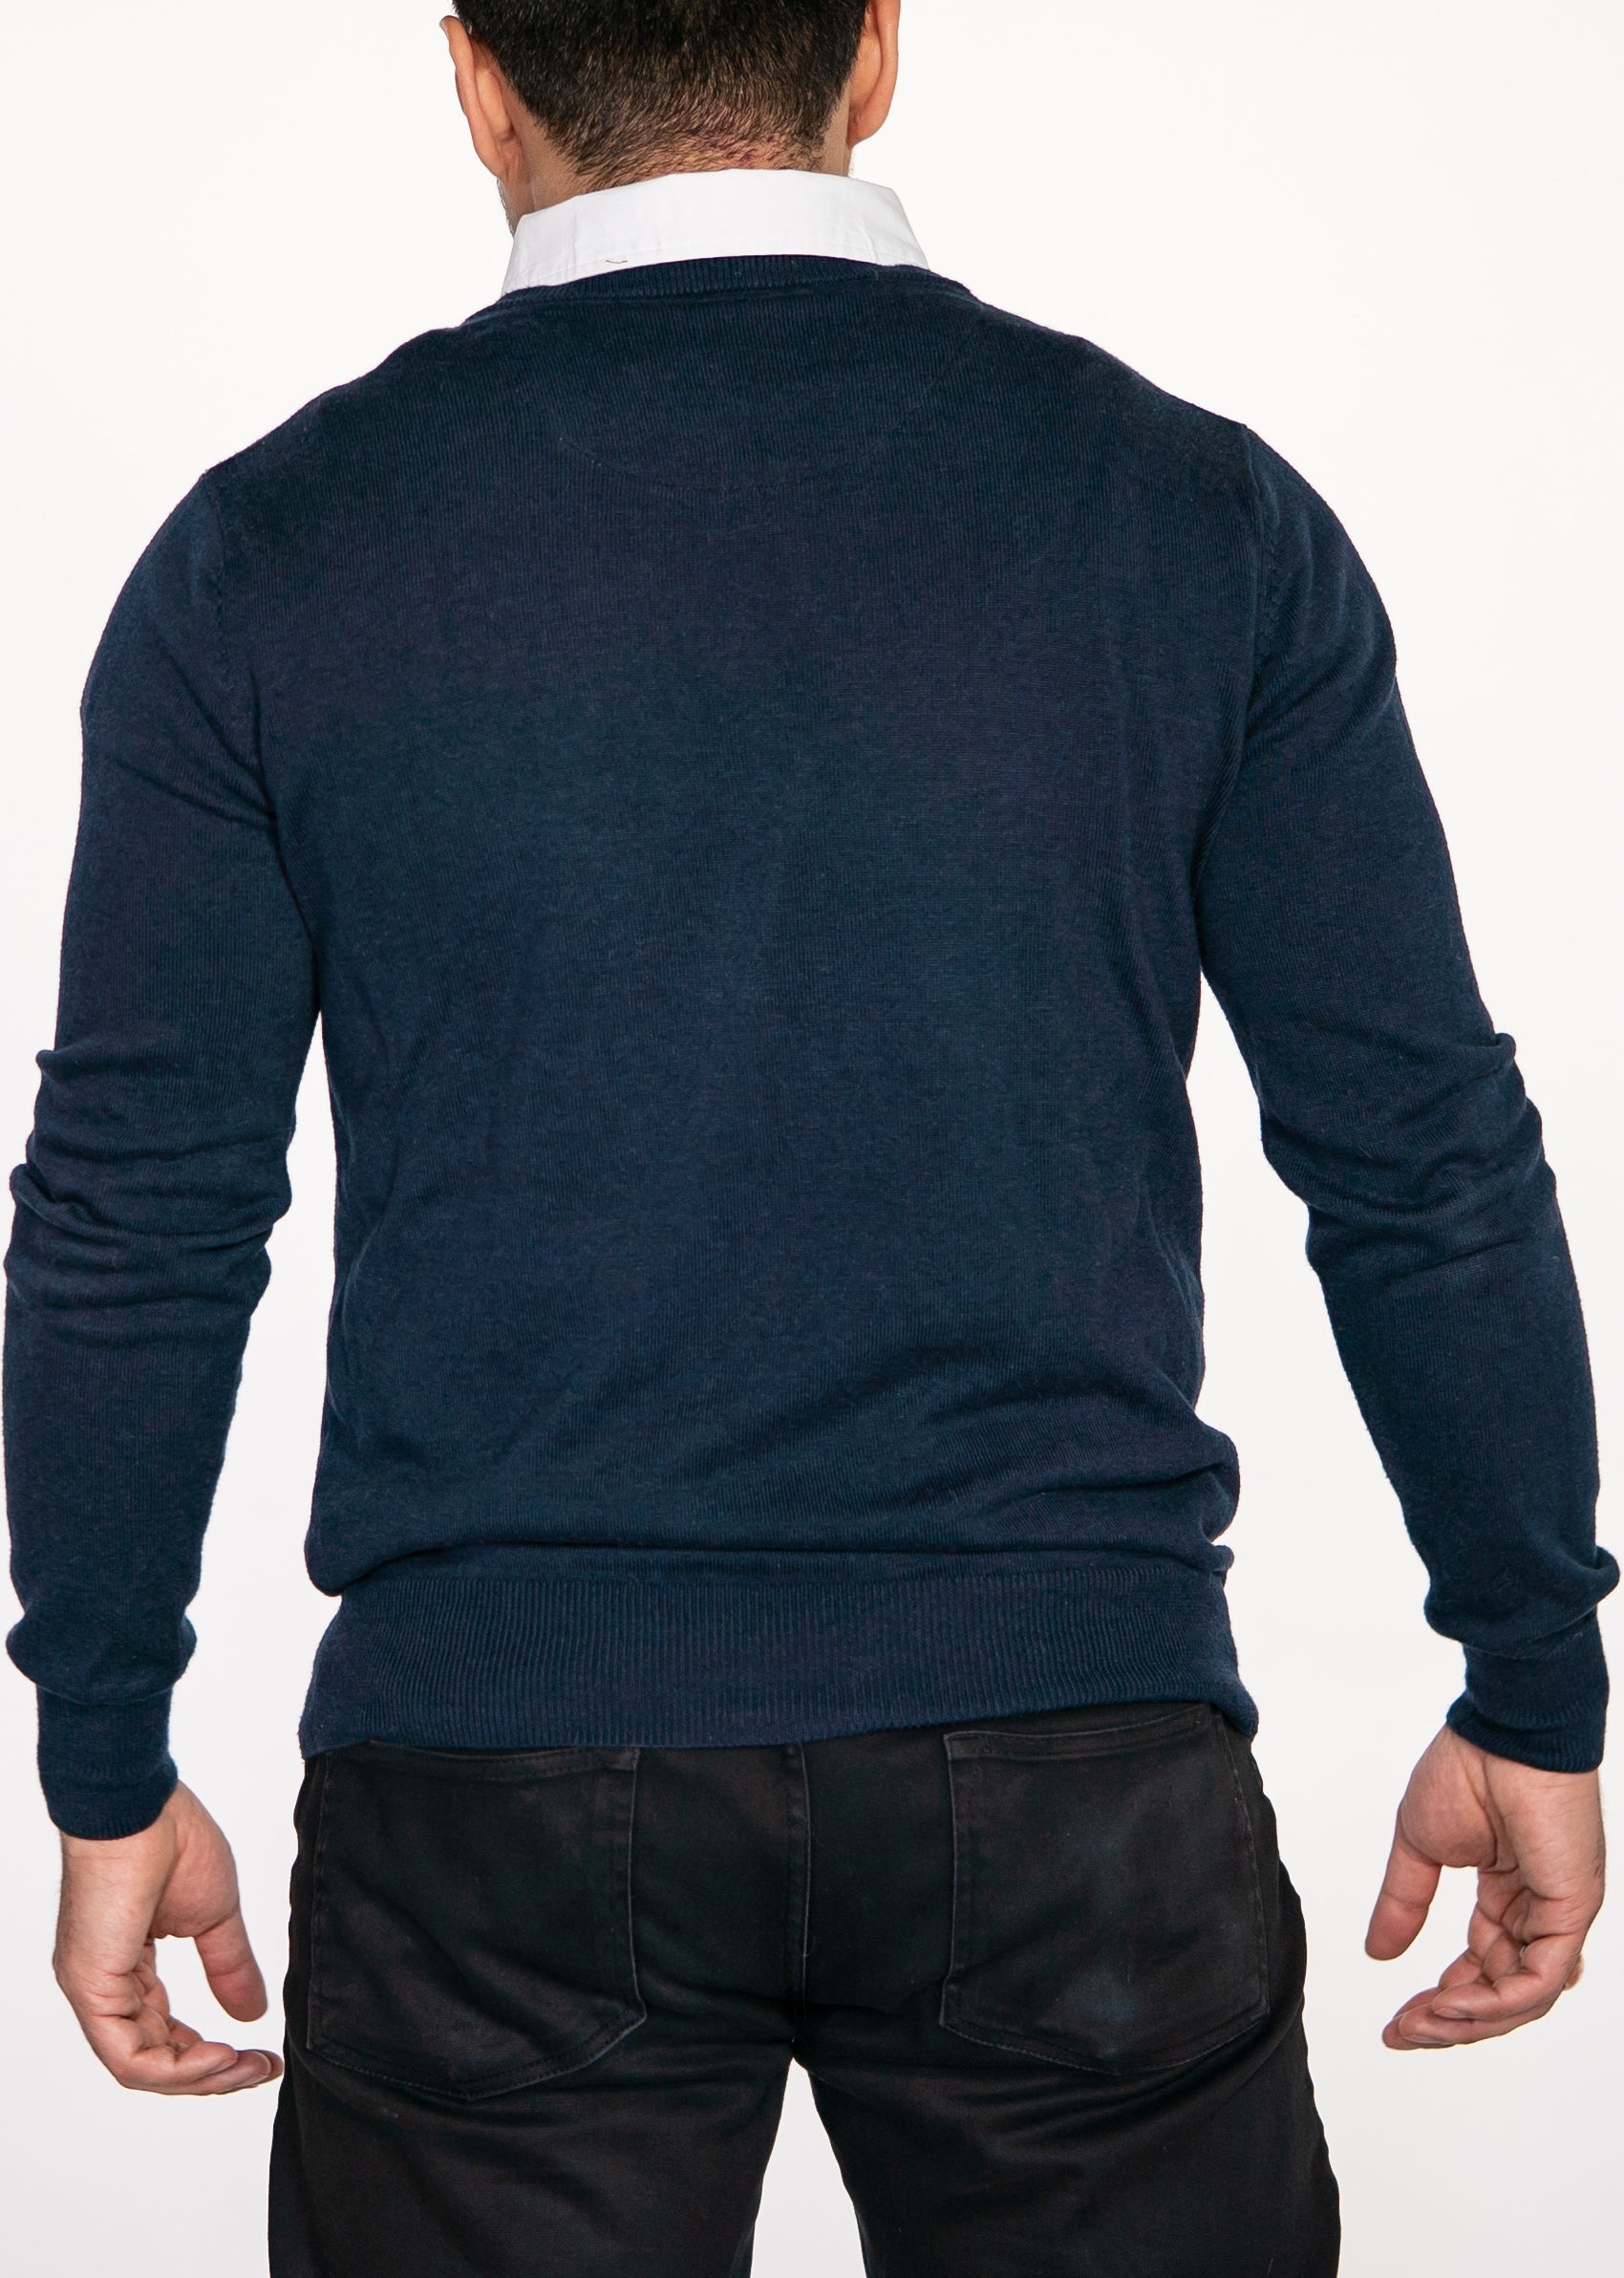 Navy Blue Sweater with White Collared Shirt